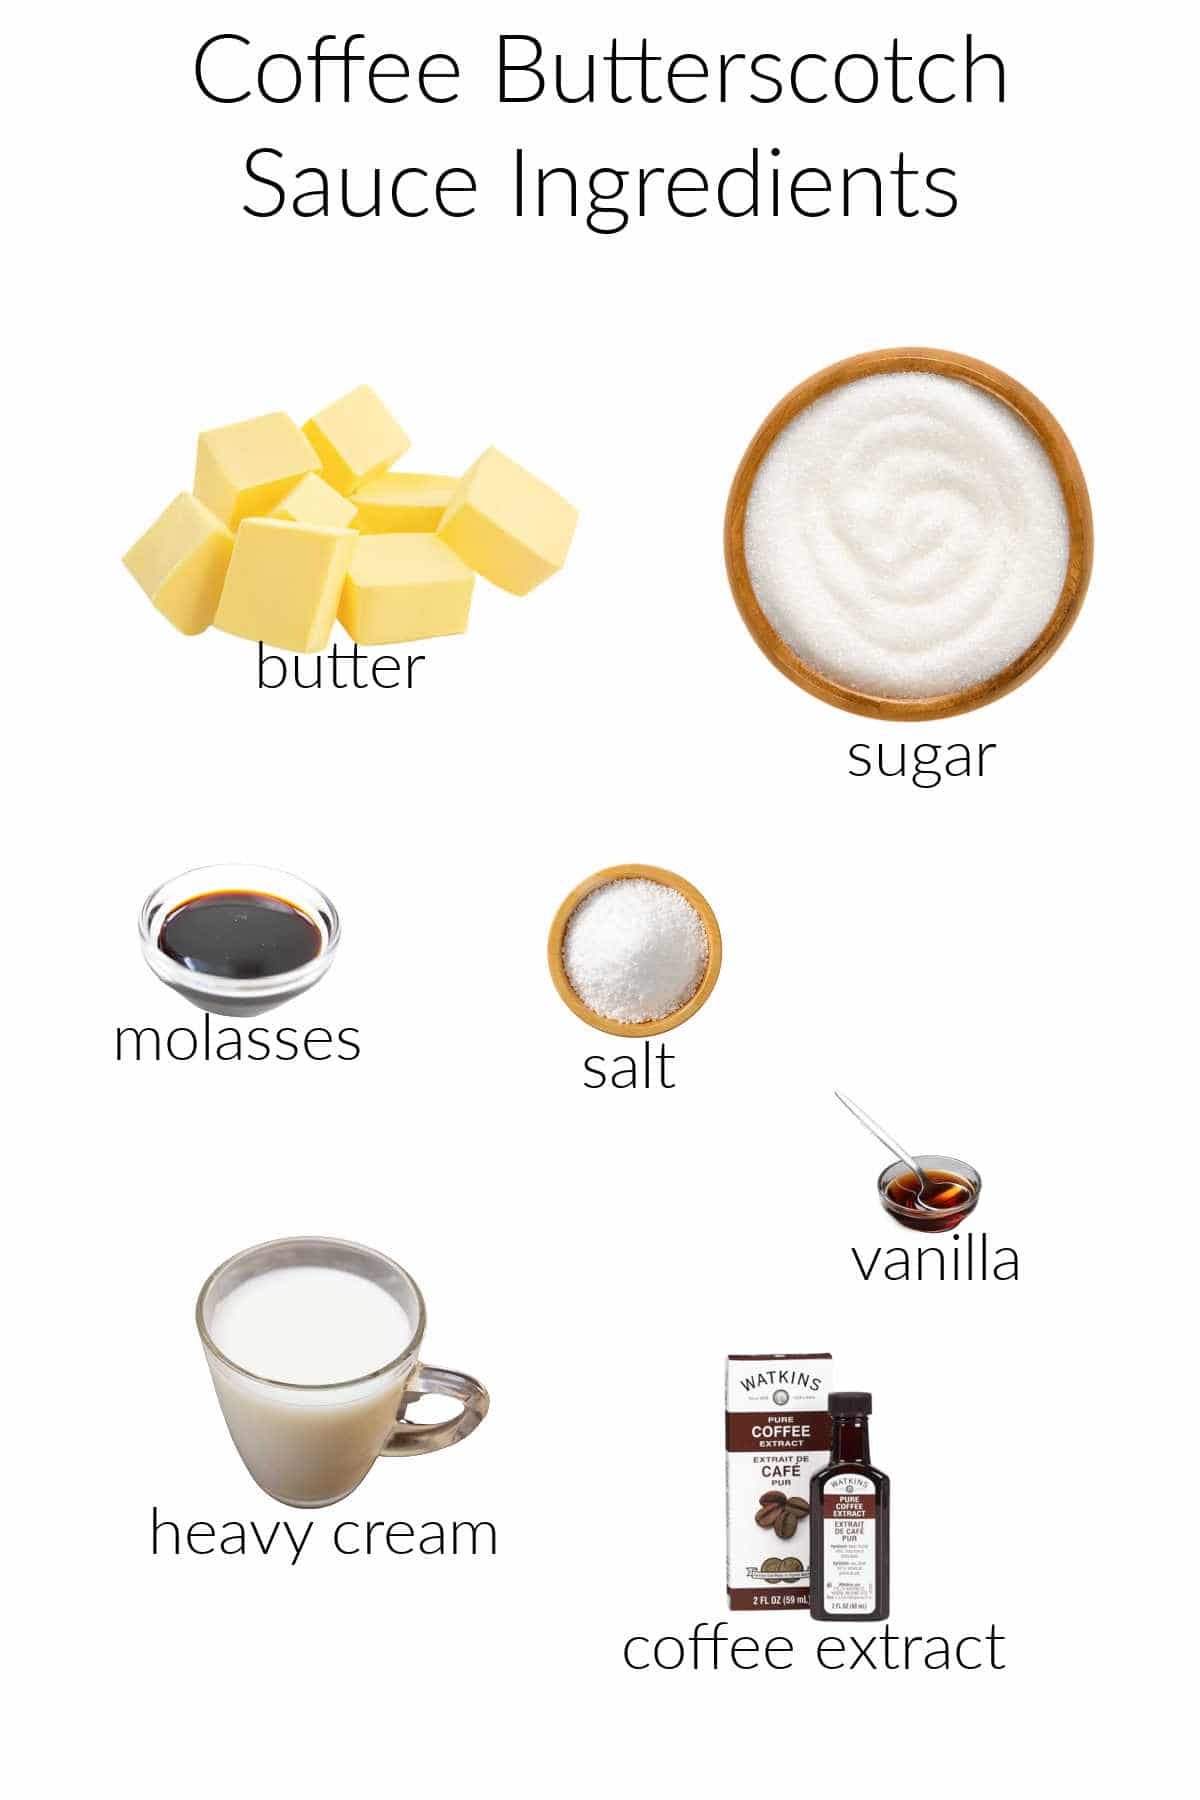 Ingredients for making coffee butterscotch sauce: Butter cubes, white sugar in a wooden bowl, molasses in a small clear glass bowl, salt in a small wooden bowl, vanilla in a small clear glass bowl with a metal spoon in it, a glass mug of heavy cream, a small bottle of coffee extract. 